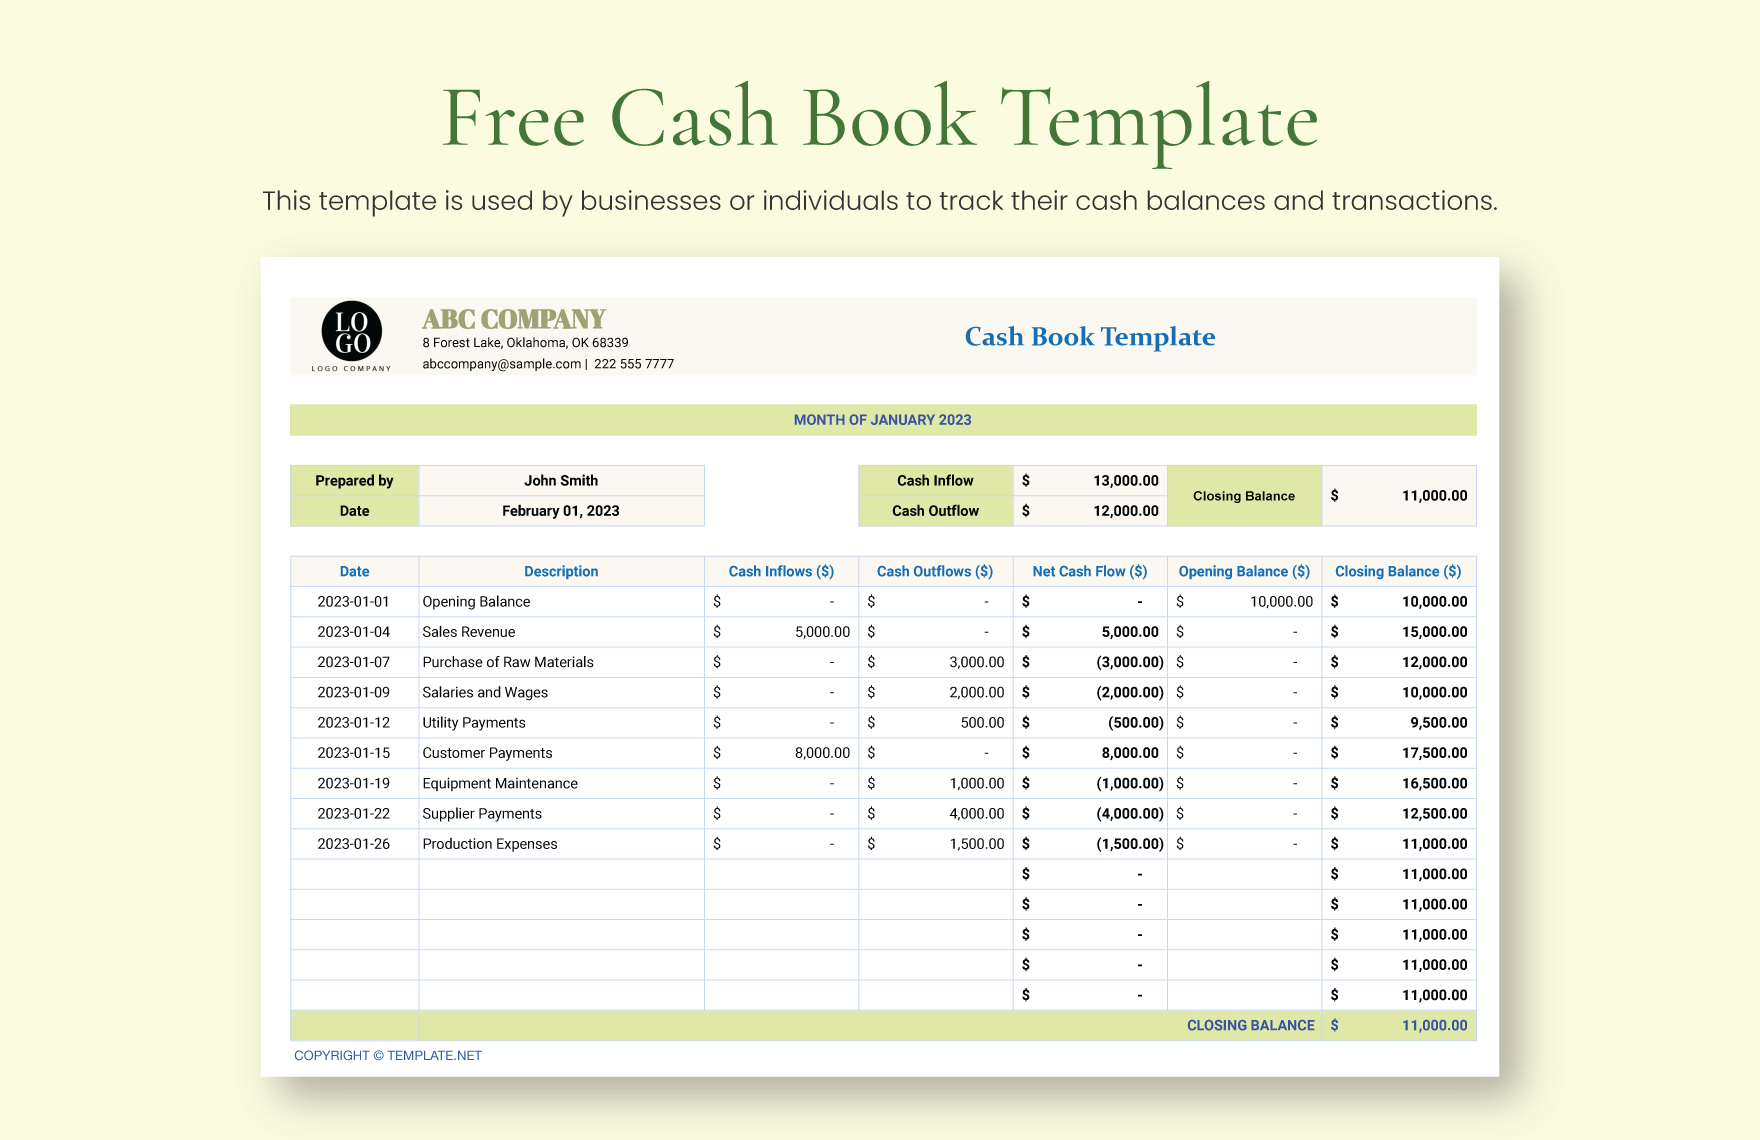 Cash Book Spreadsheet Template In Excel, Google Sheets - Download with Free Cash Book Template Printable